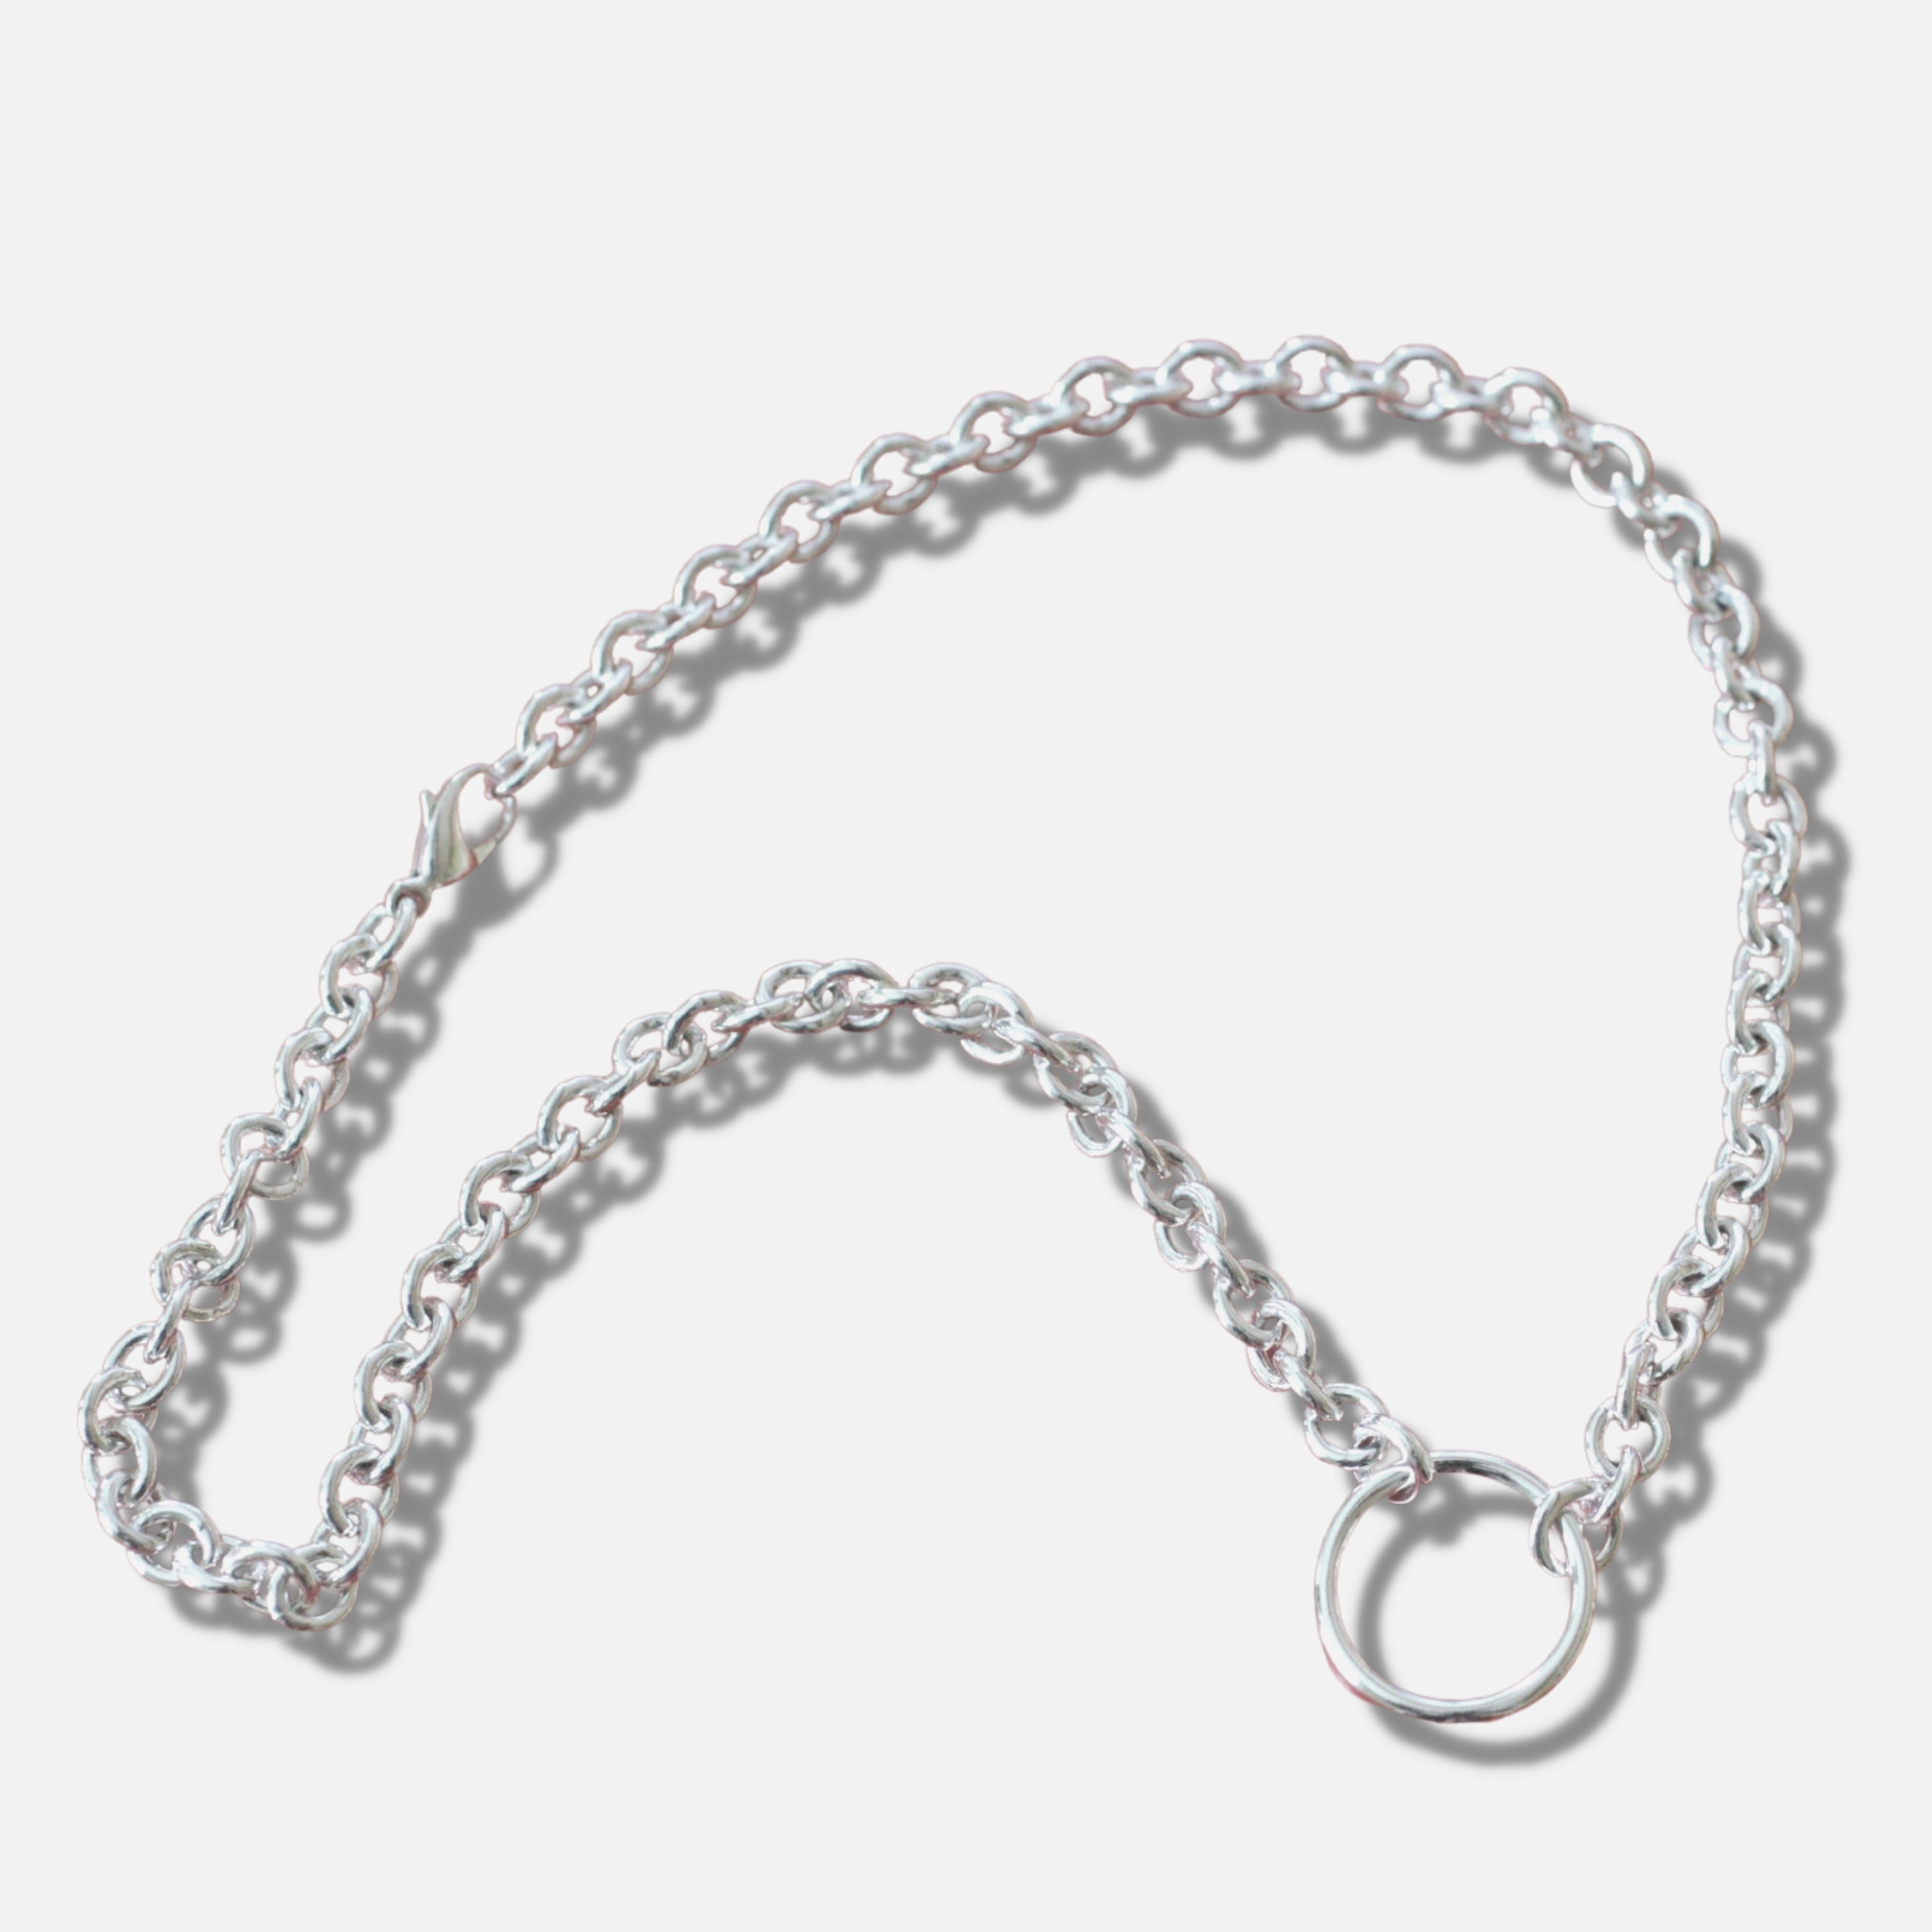 Handmade Sterling Silver BDSM Day Collar with Classic O Ring and Medium Chain